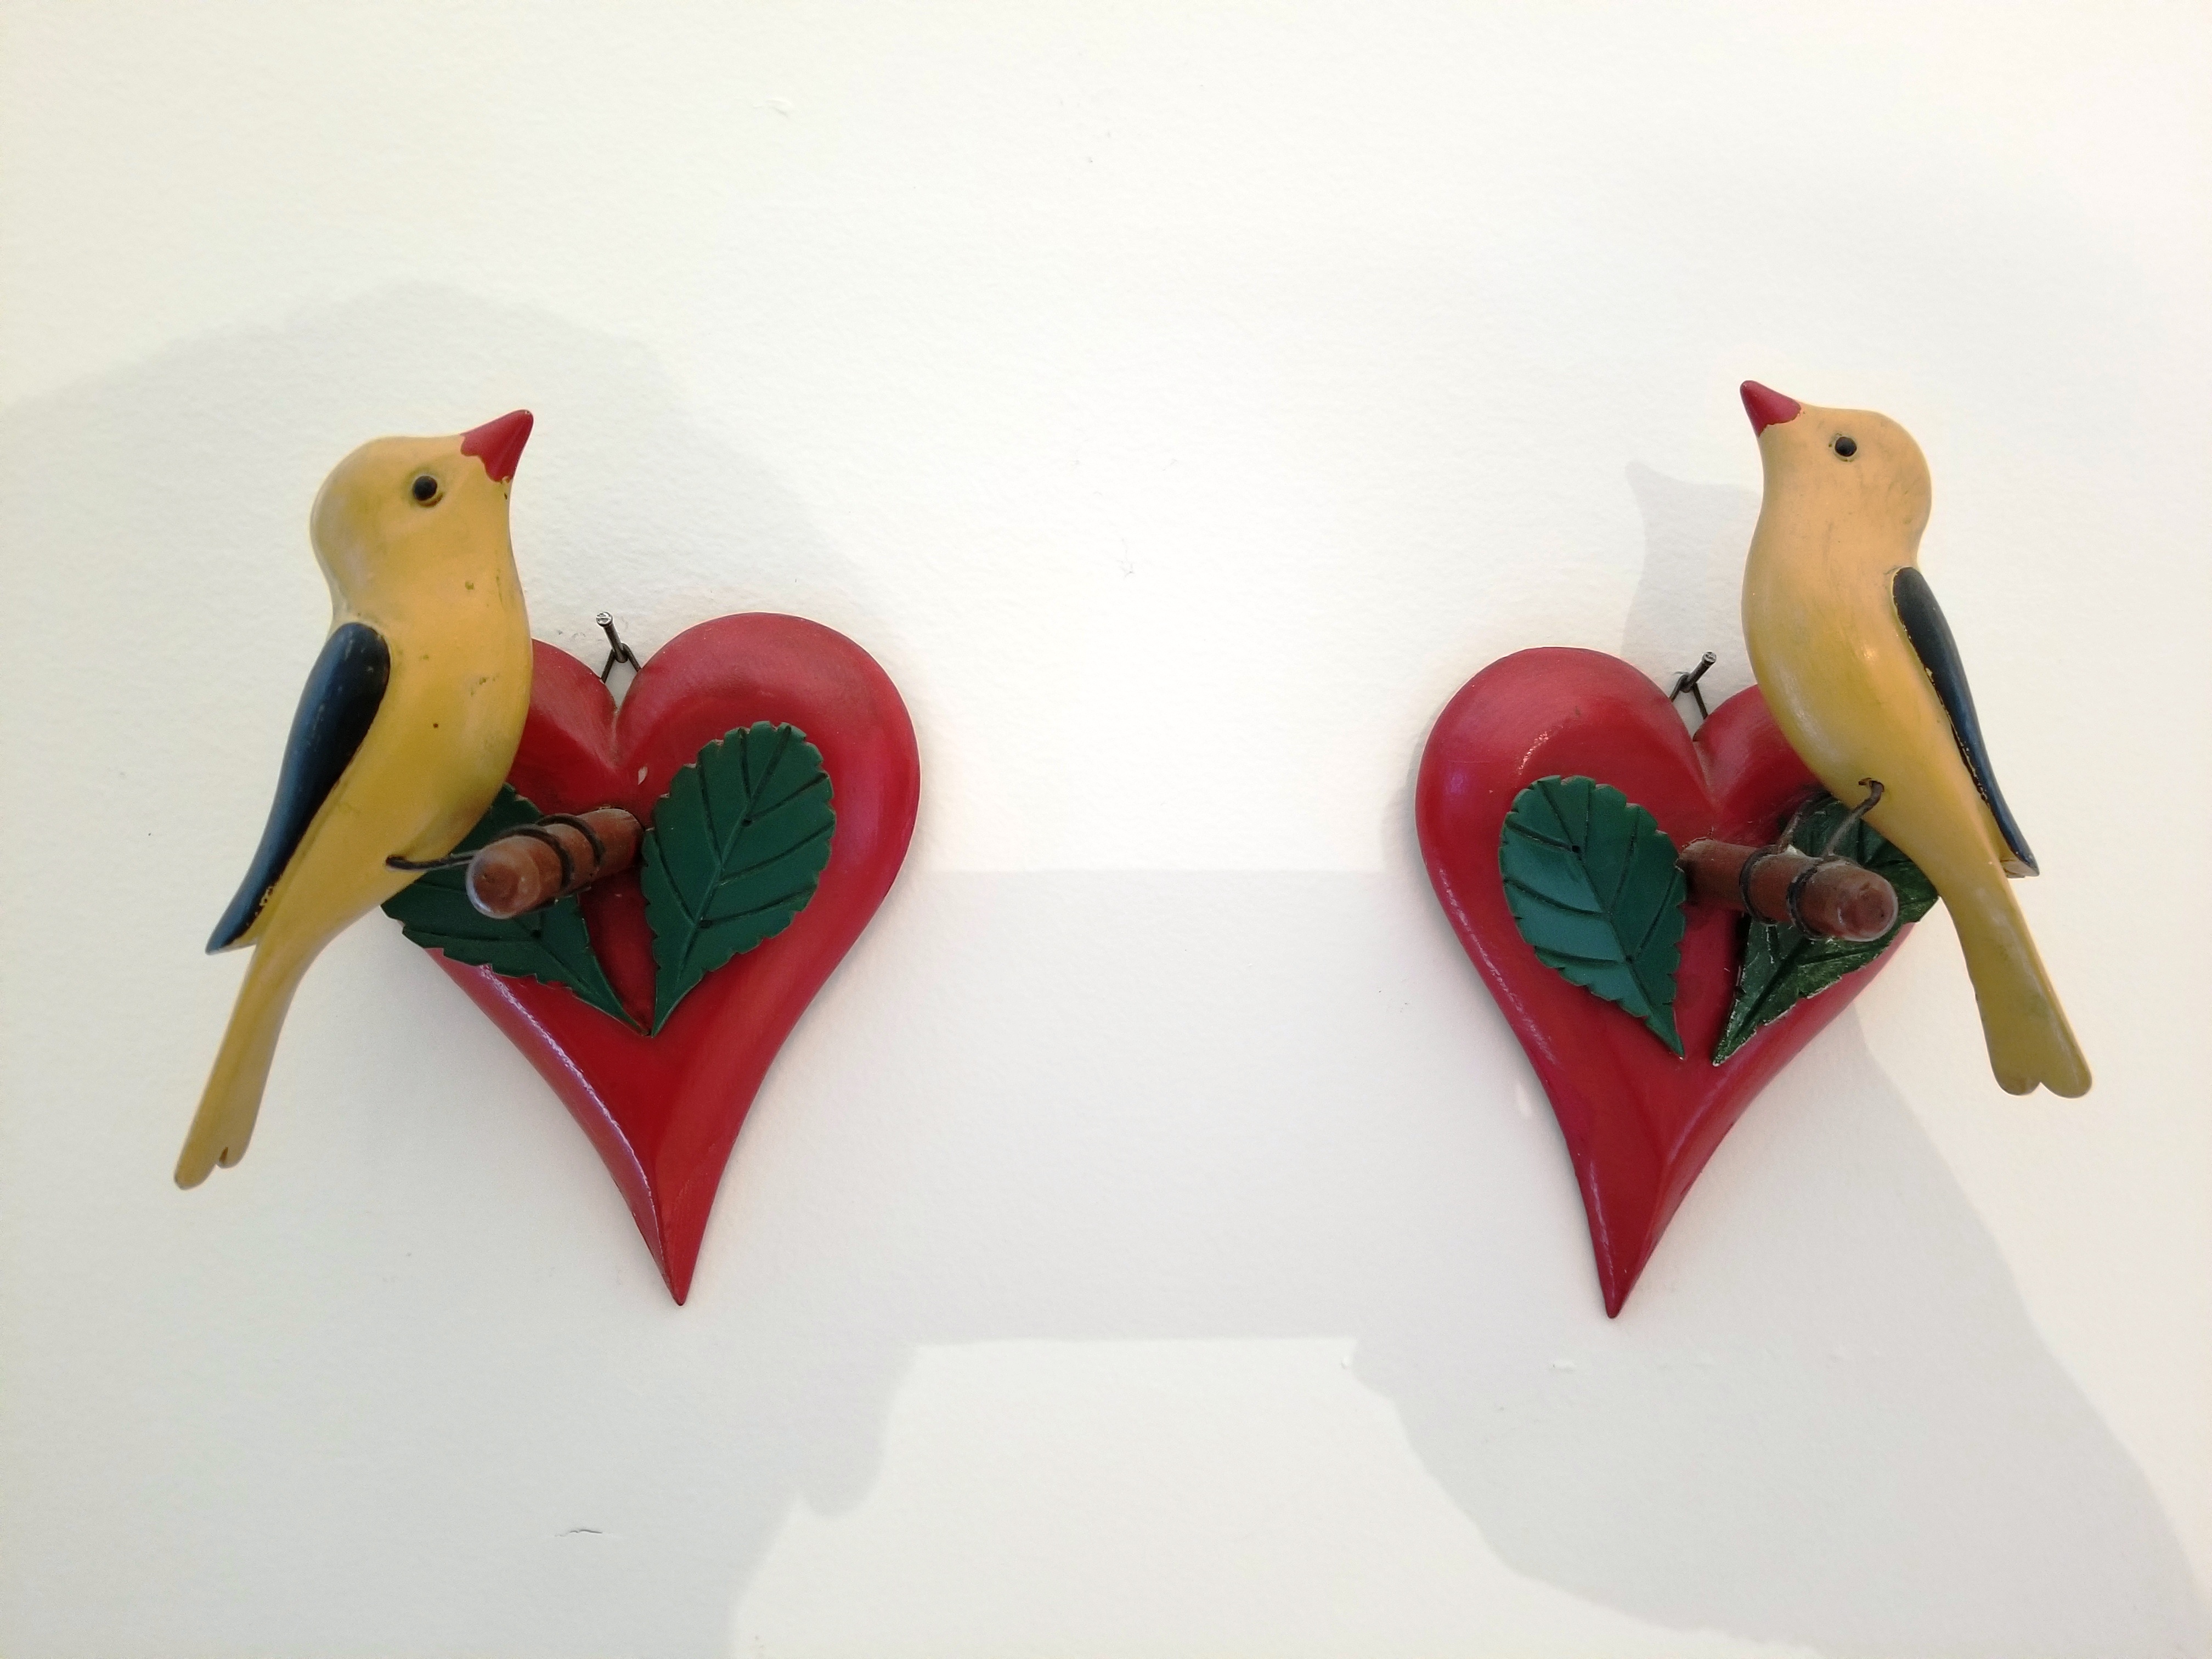 A PAIR OF WOOD CARVED FINCHES ON HEART